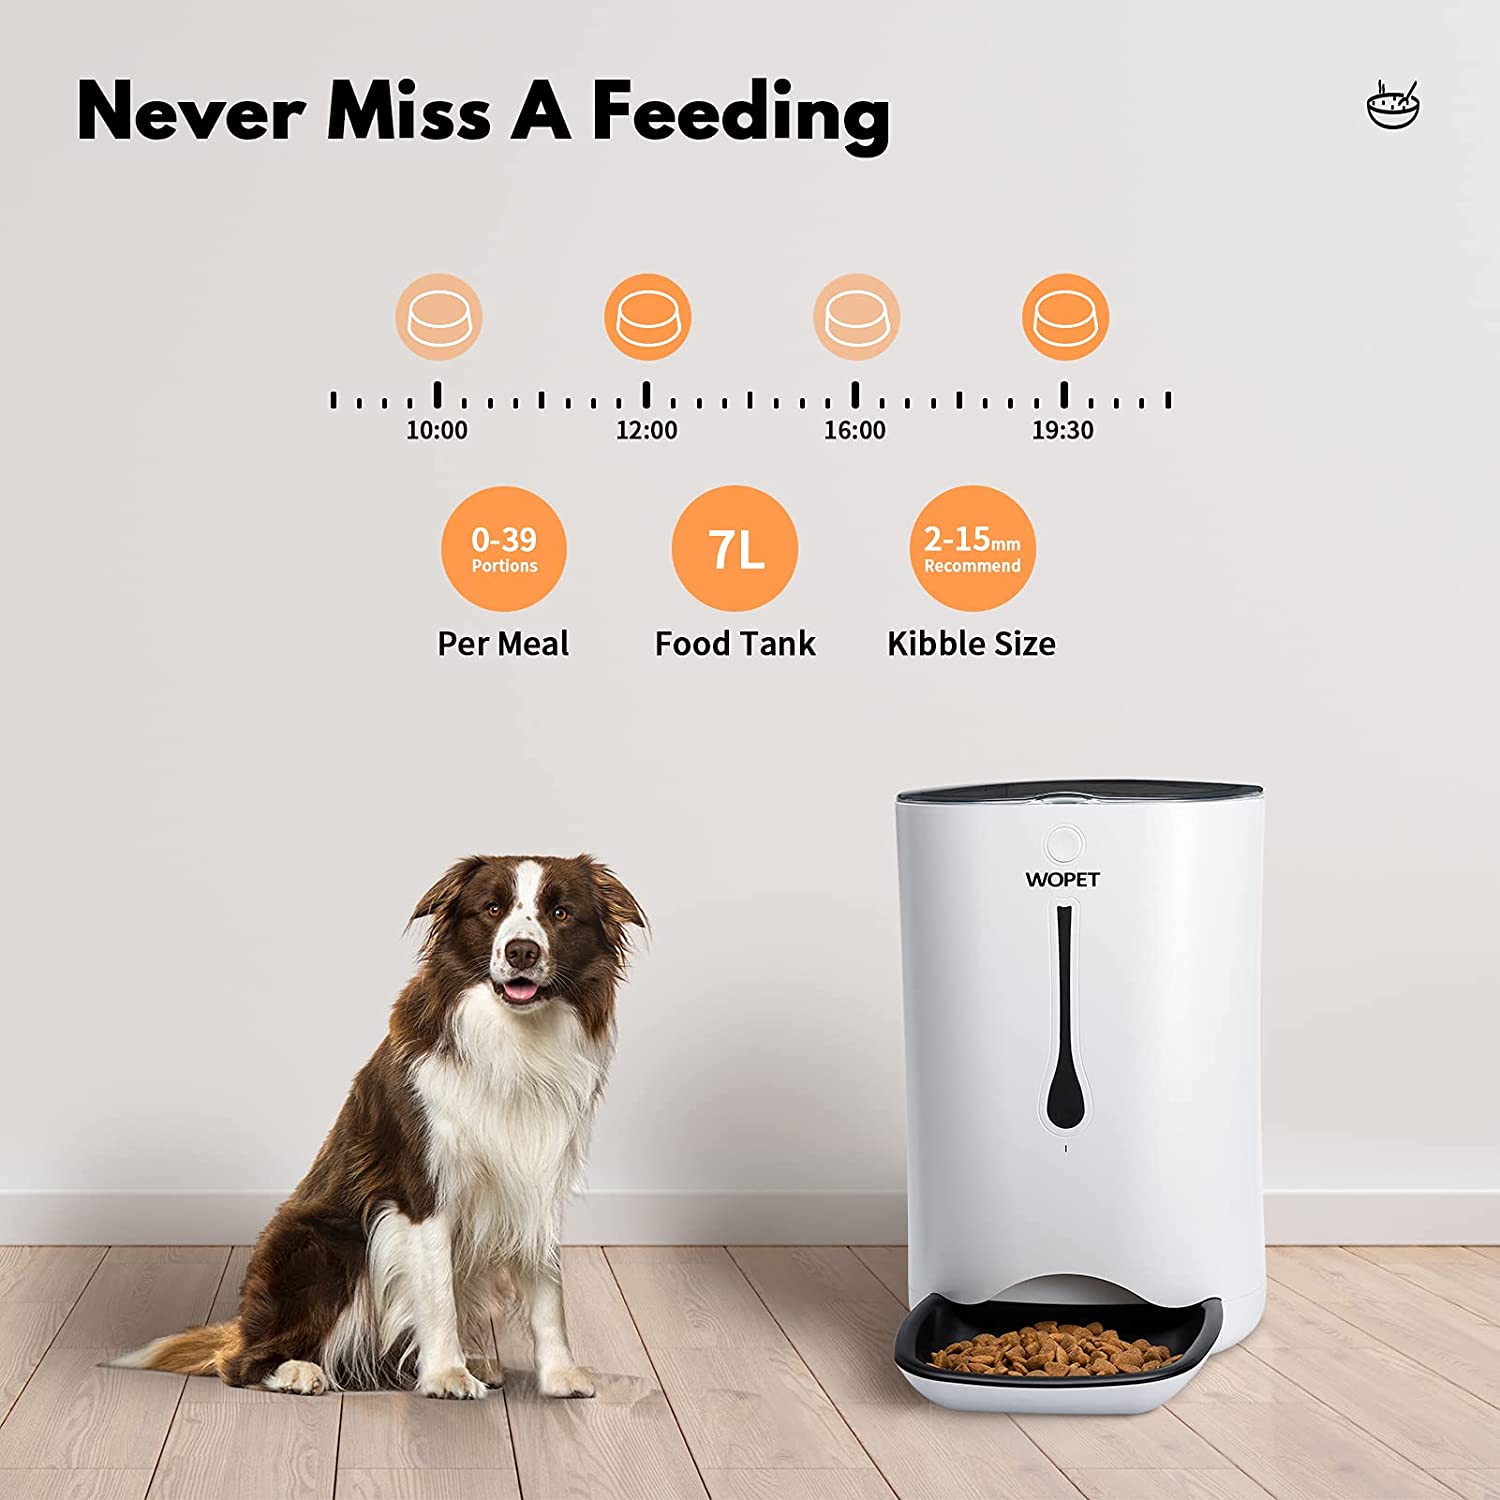 WOPET automatic food dispenser for Dogs and Cats.